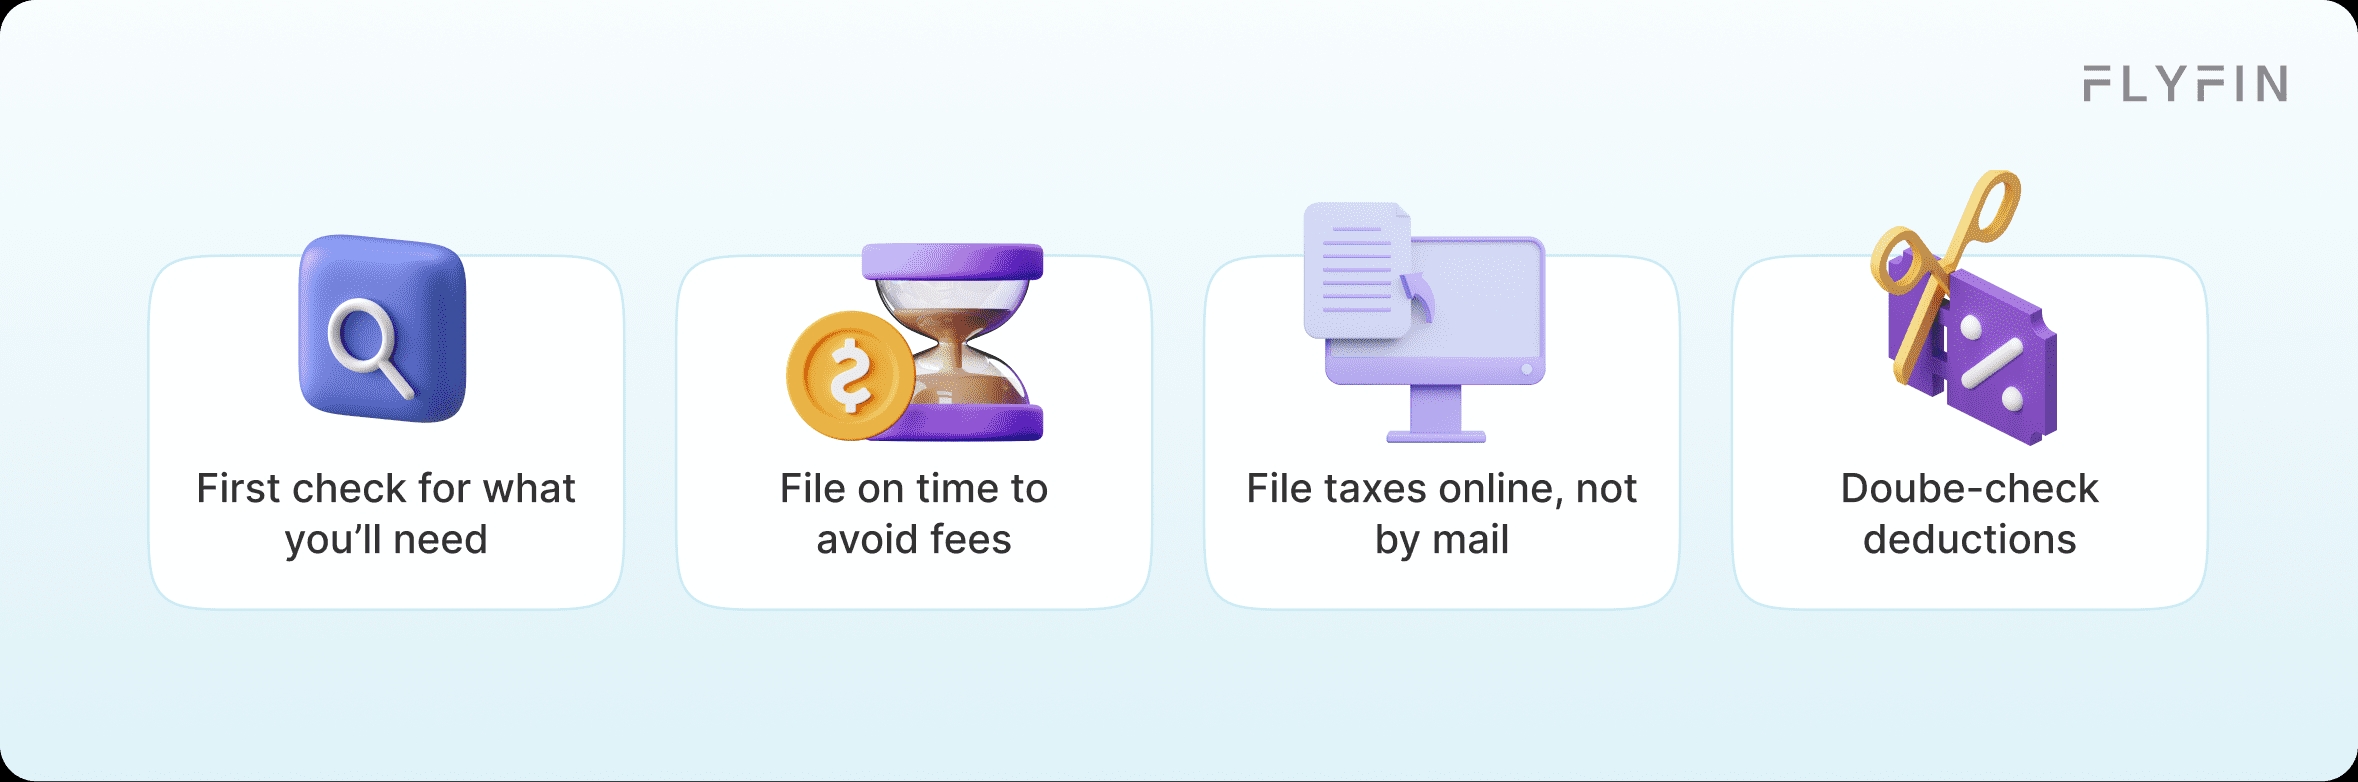 A guide for filing taxes on time and avoiding fees. Tips include checking for necessary documents, filing online, and double-checking deductions. Suitable for self-employed, freelancers, and those with 1099 forms.